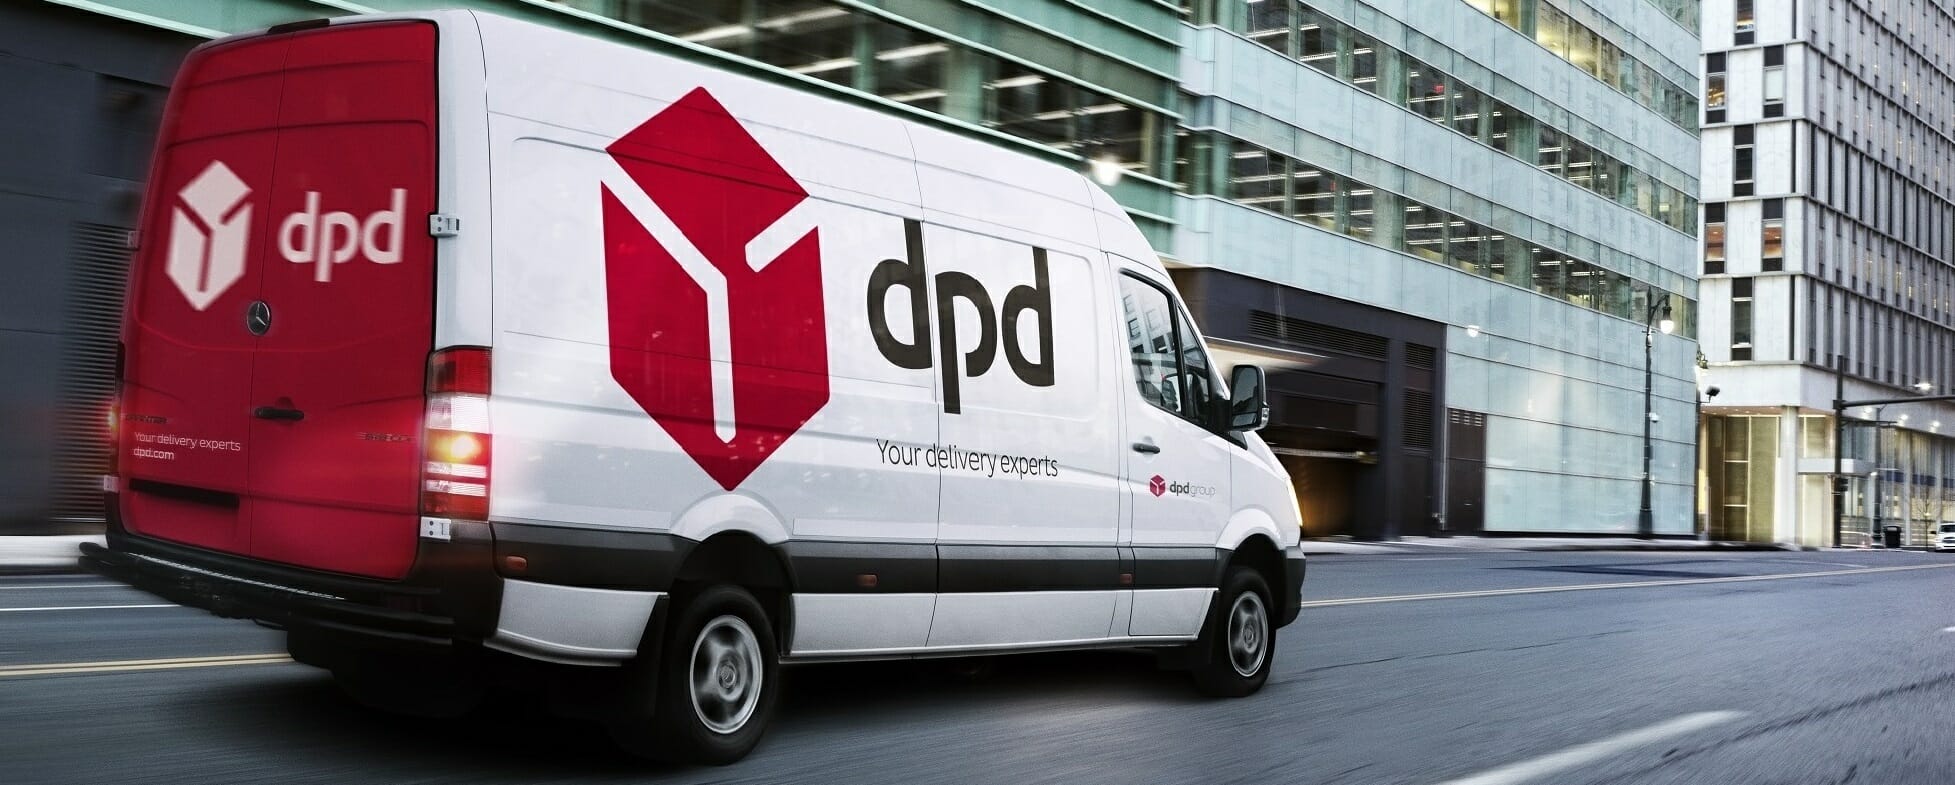 DPD_delivery.jpg